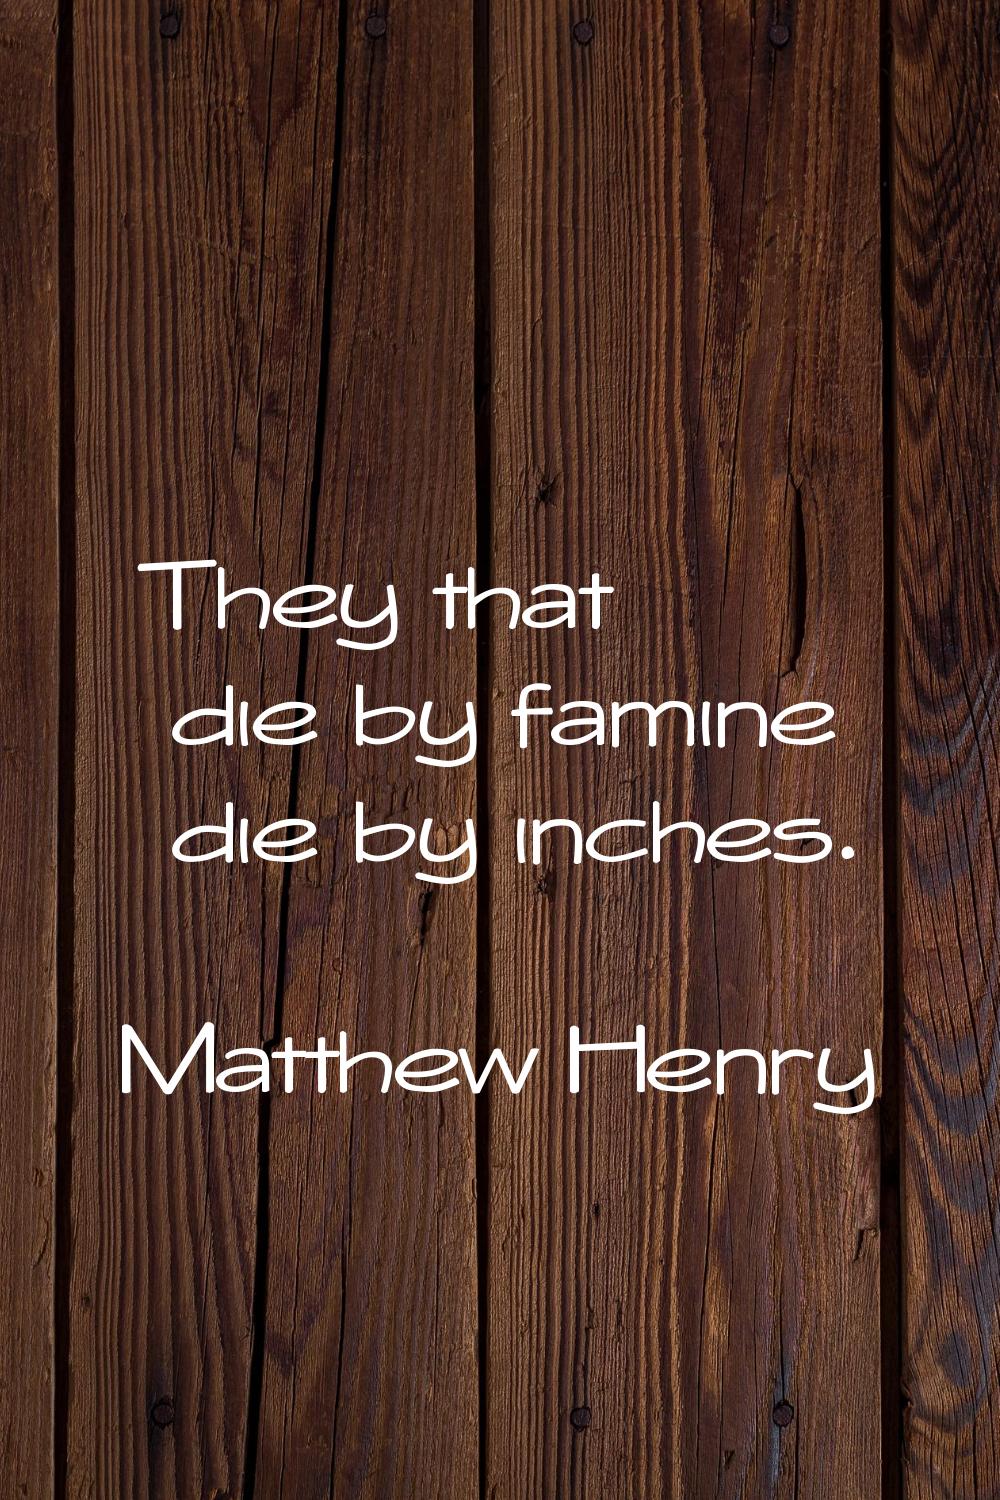 They that die by famine die by inches.